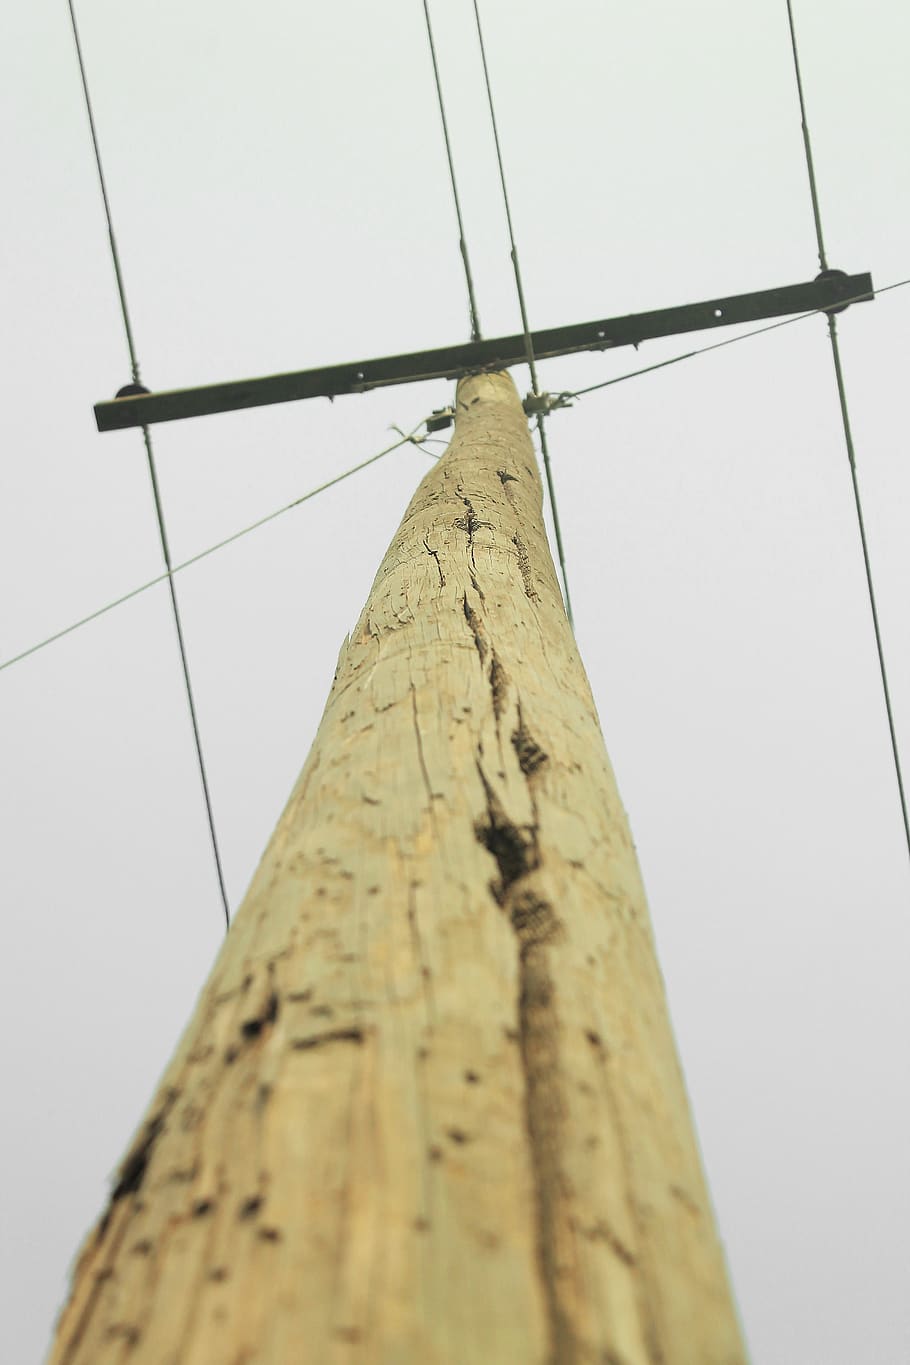 electricity, cables, wooden poles, electrical wires, line, high, power, electrical, electric, wire